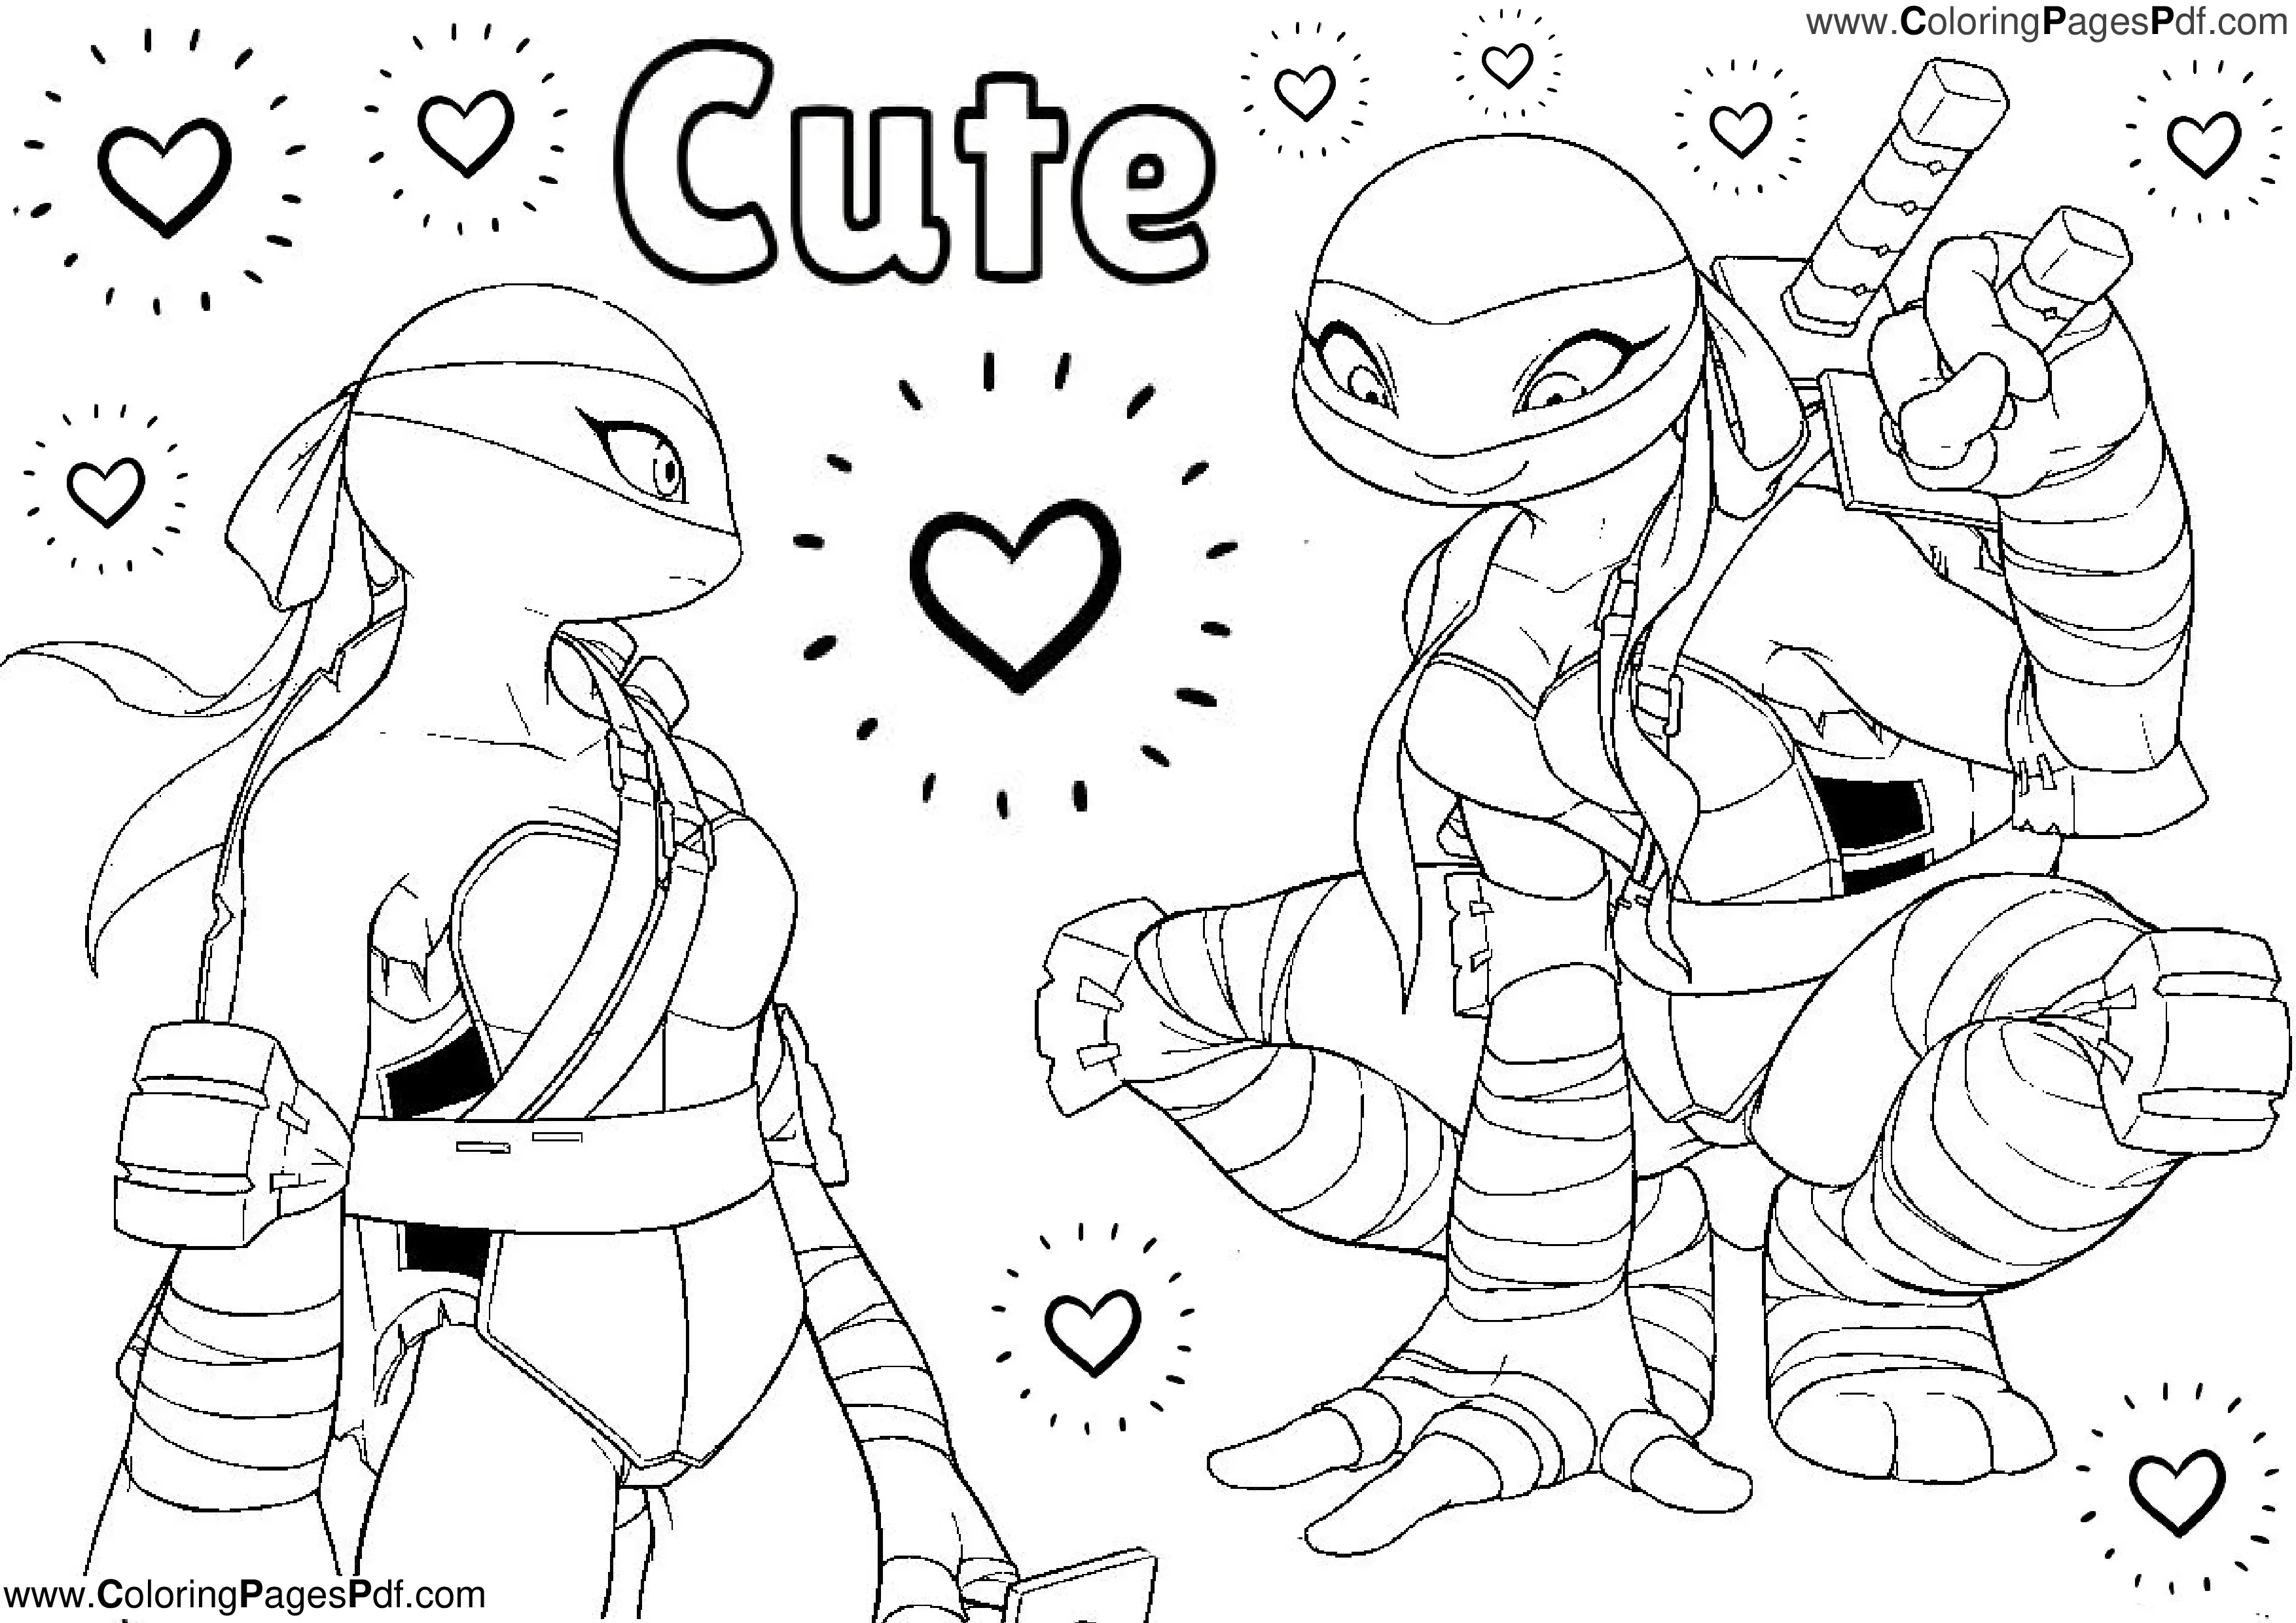 Ninja turtles coloring pages for girls